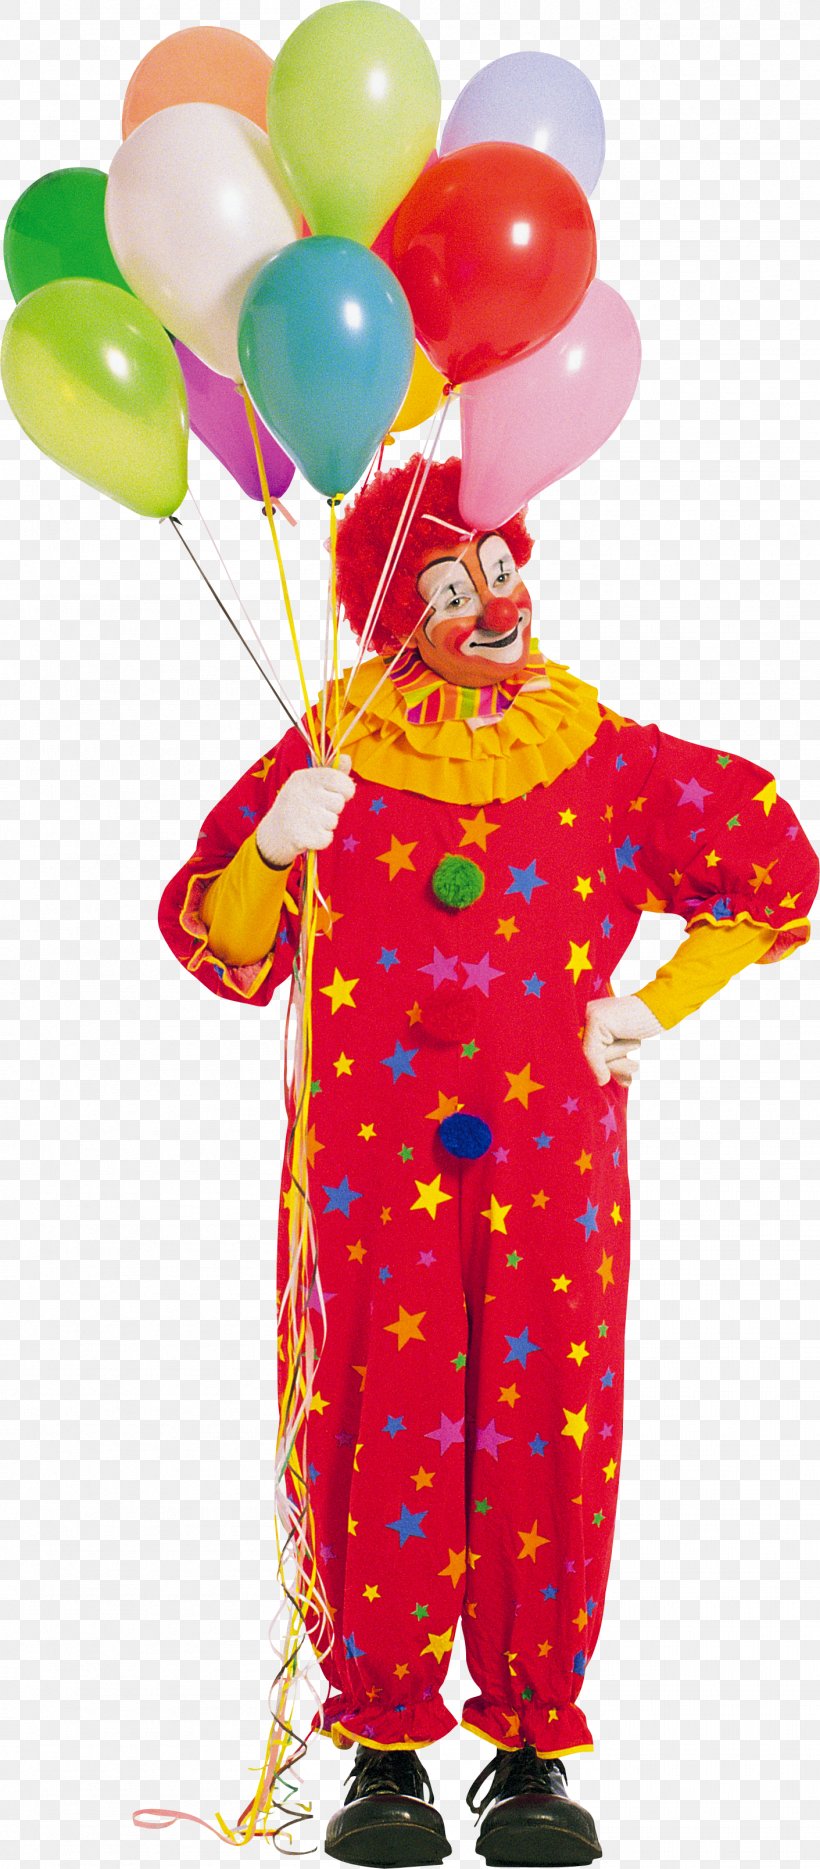 Evil Clown Stock Photography Getty Images, PNG, 1411x3217px, Clown, Balloon, Balloon Modelling, Coulrophobia, Evil Clown Download Free